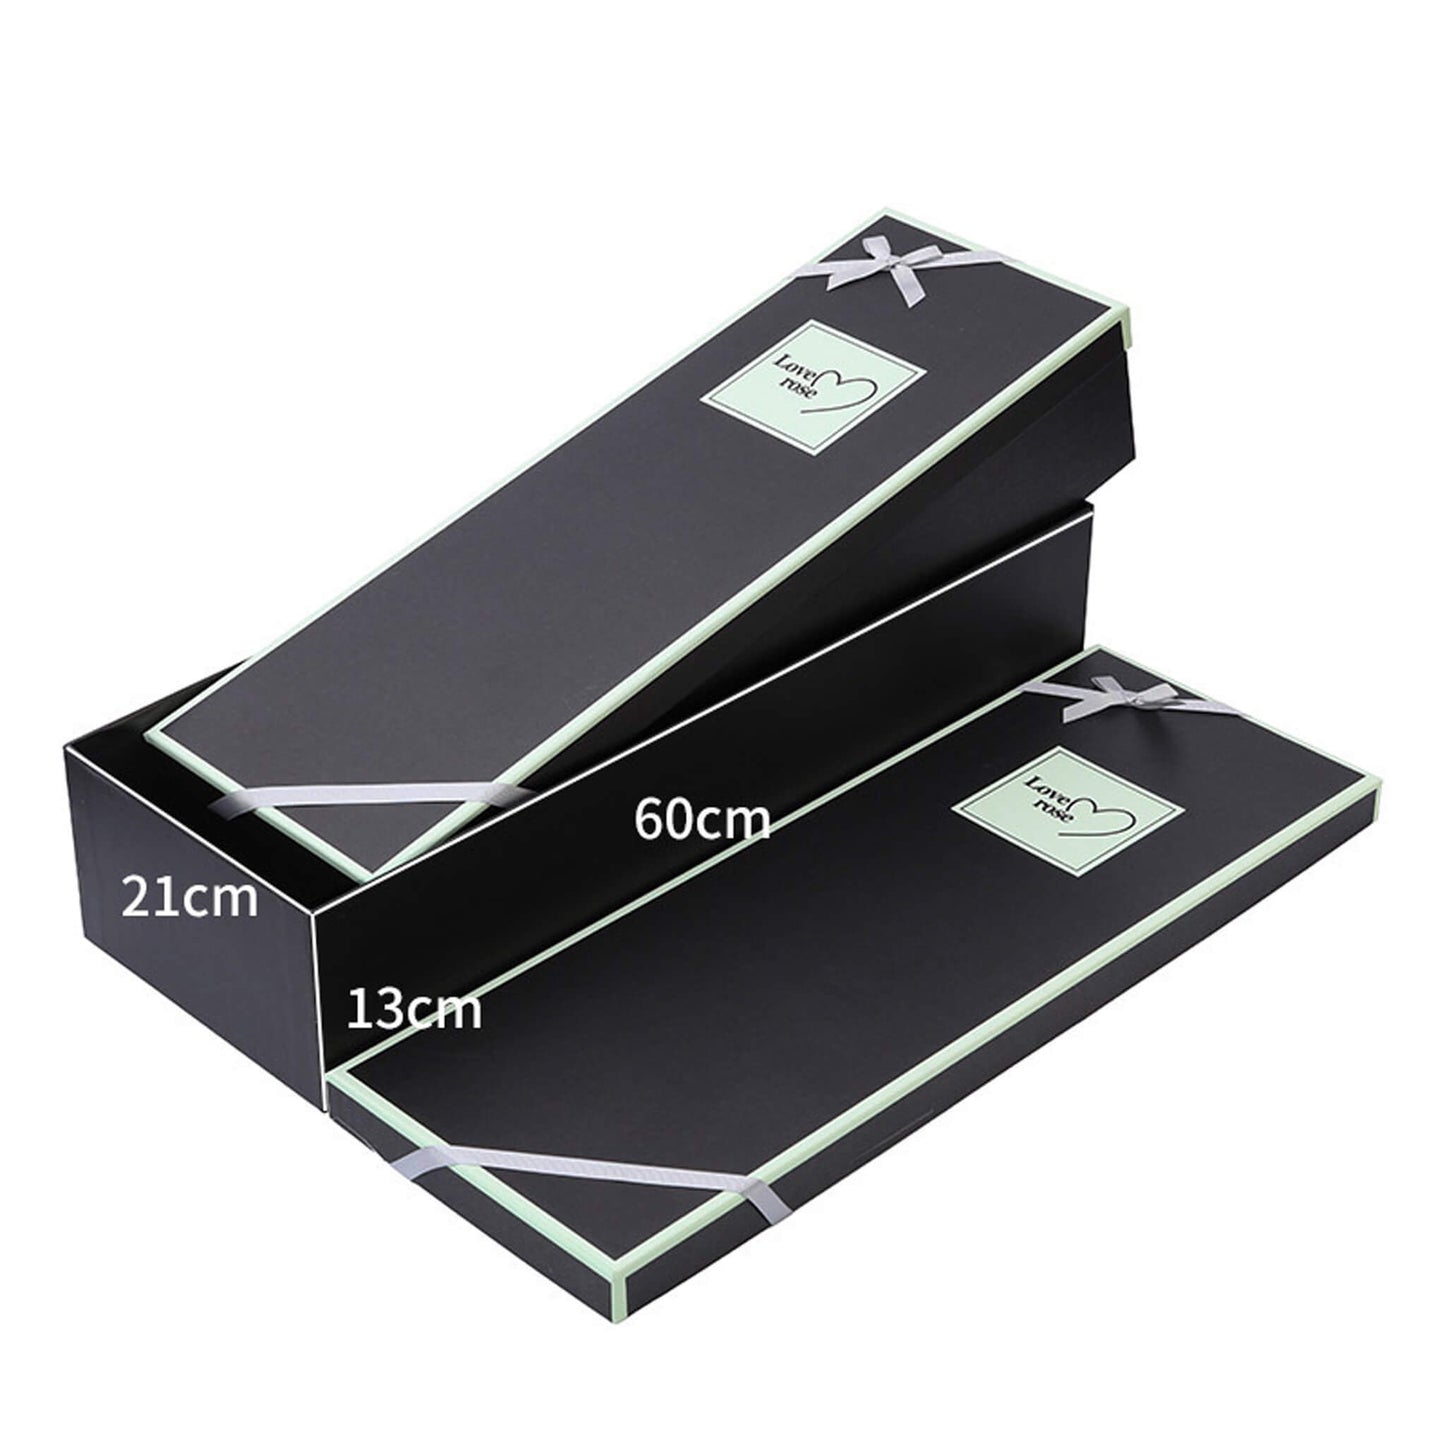 Set of 2 Pieces Square Gift Packaging Box with Lid - Bulk Lots